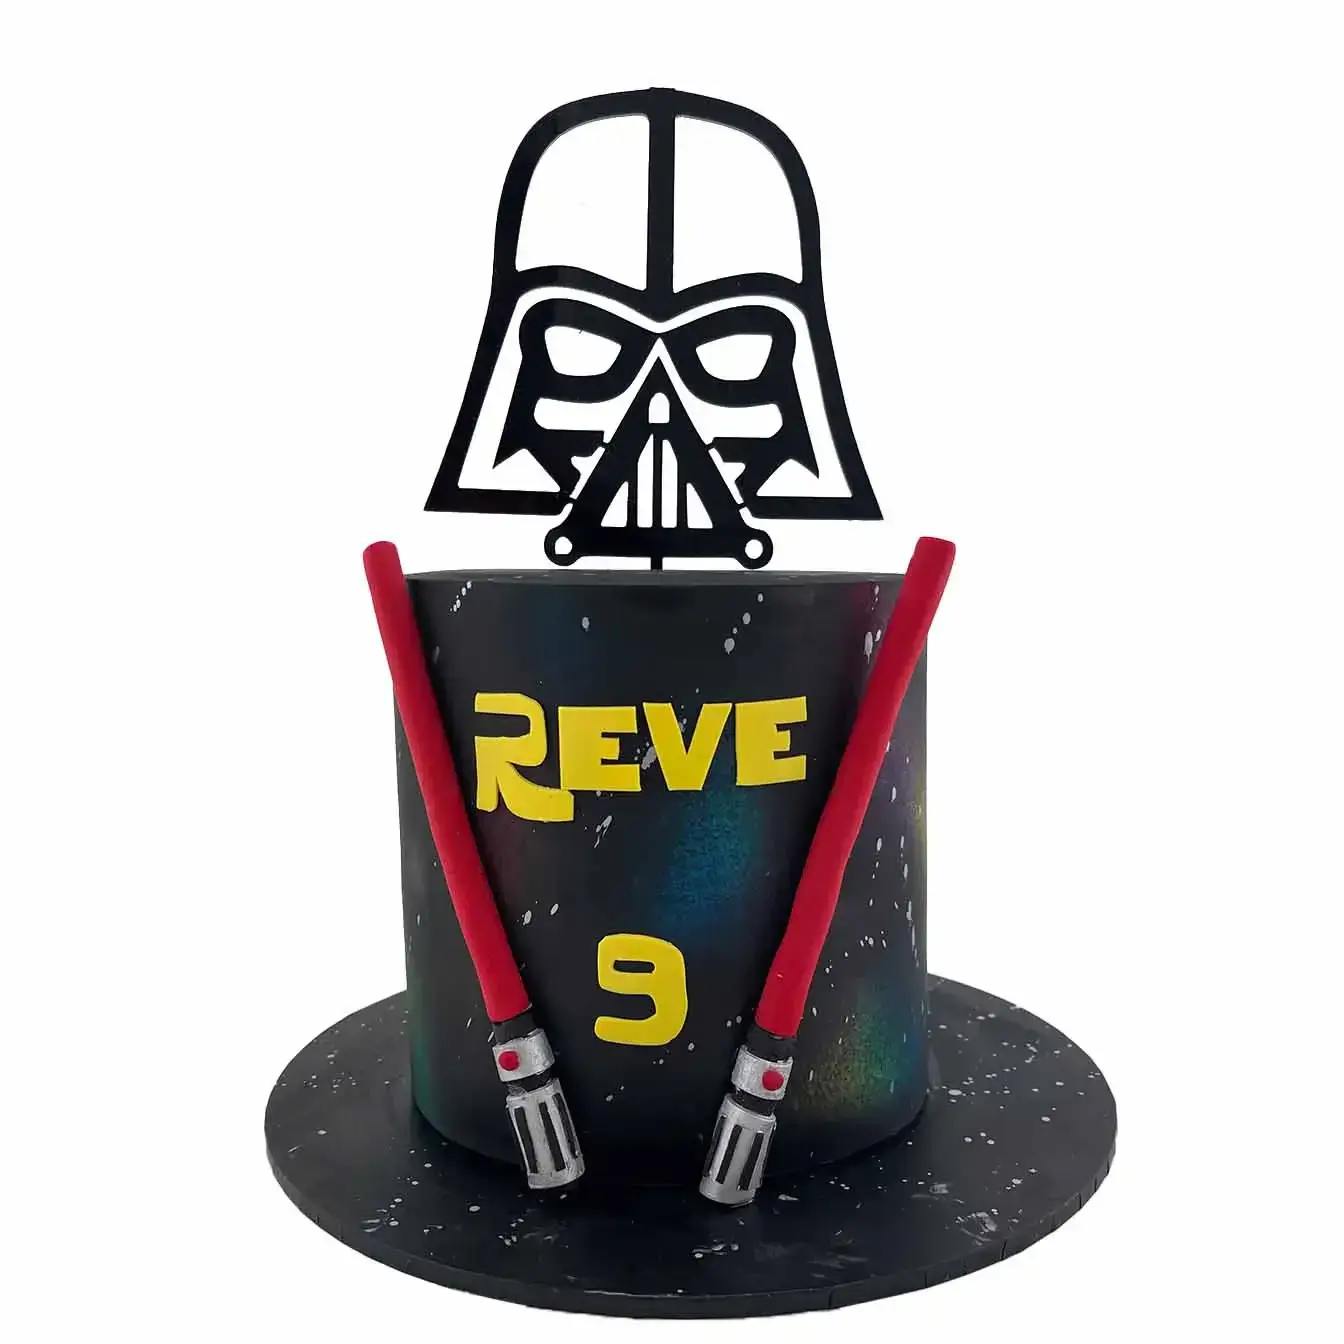 Galactic Jedi Masterpiece Cake - A galaxy fondant-iced cake with two lightsabers and a Darth Vader acrylic cake topper, a captivating centerpiece for Star Wars enthusiasts and space-themed celebrations.